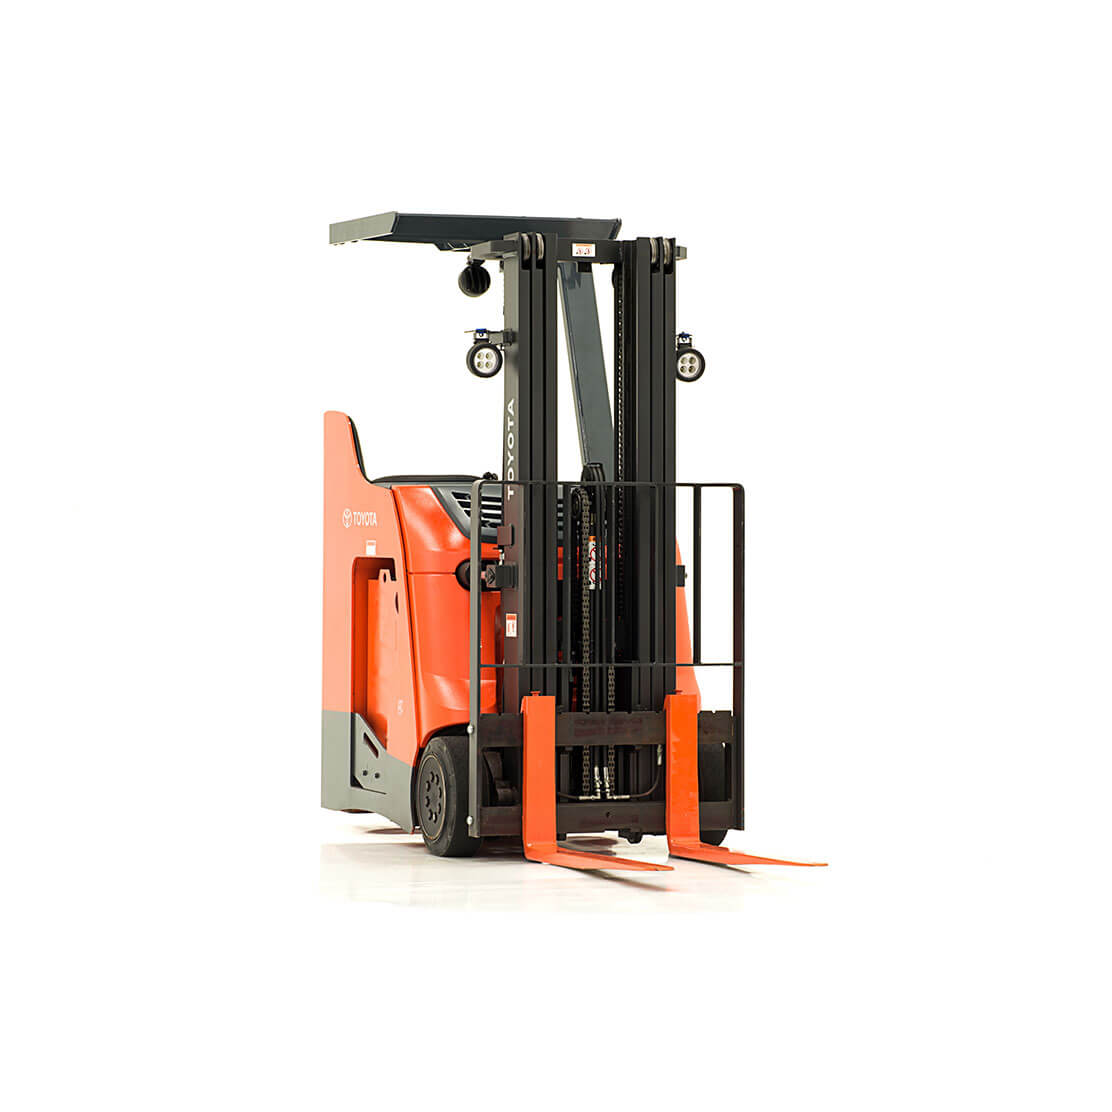 Stand-Up Rider Forklift front view 1